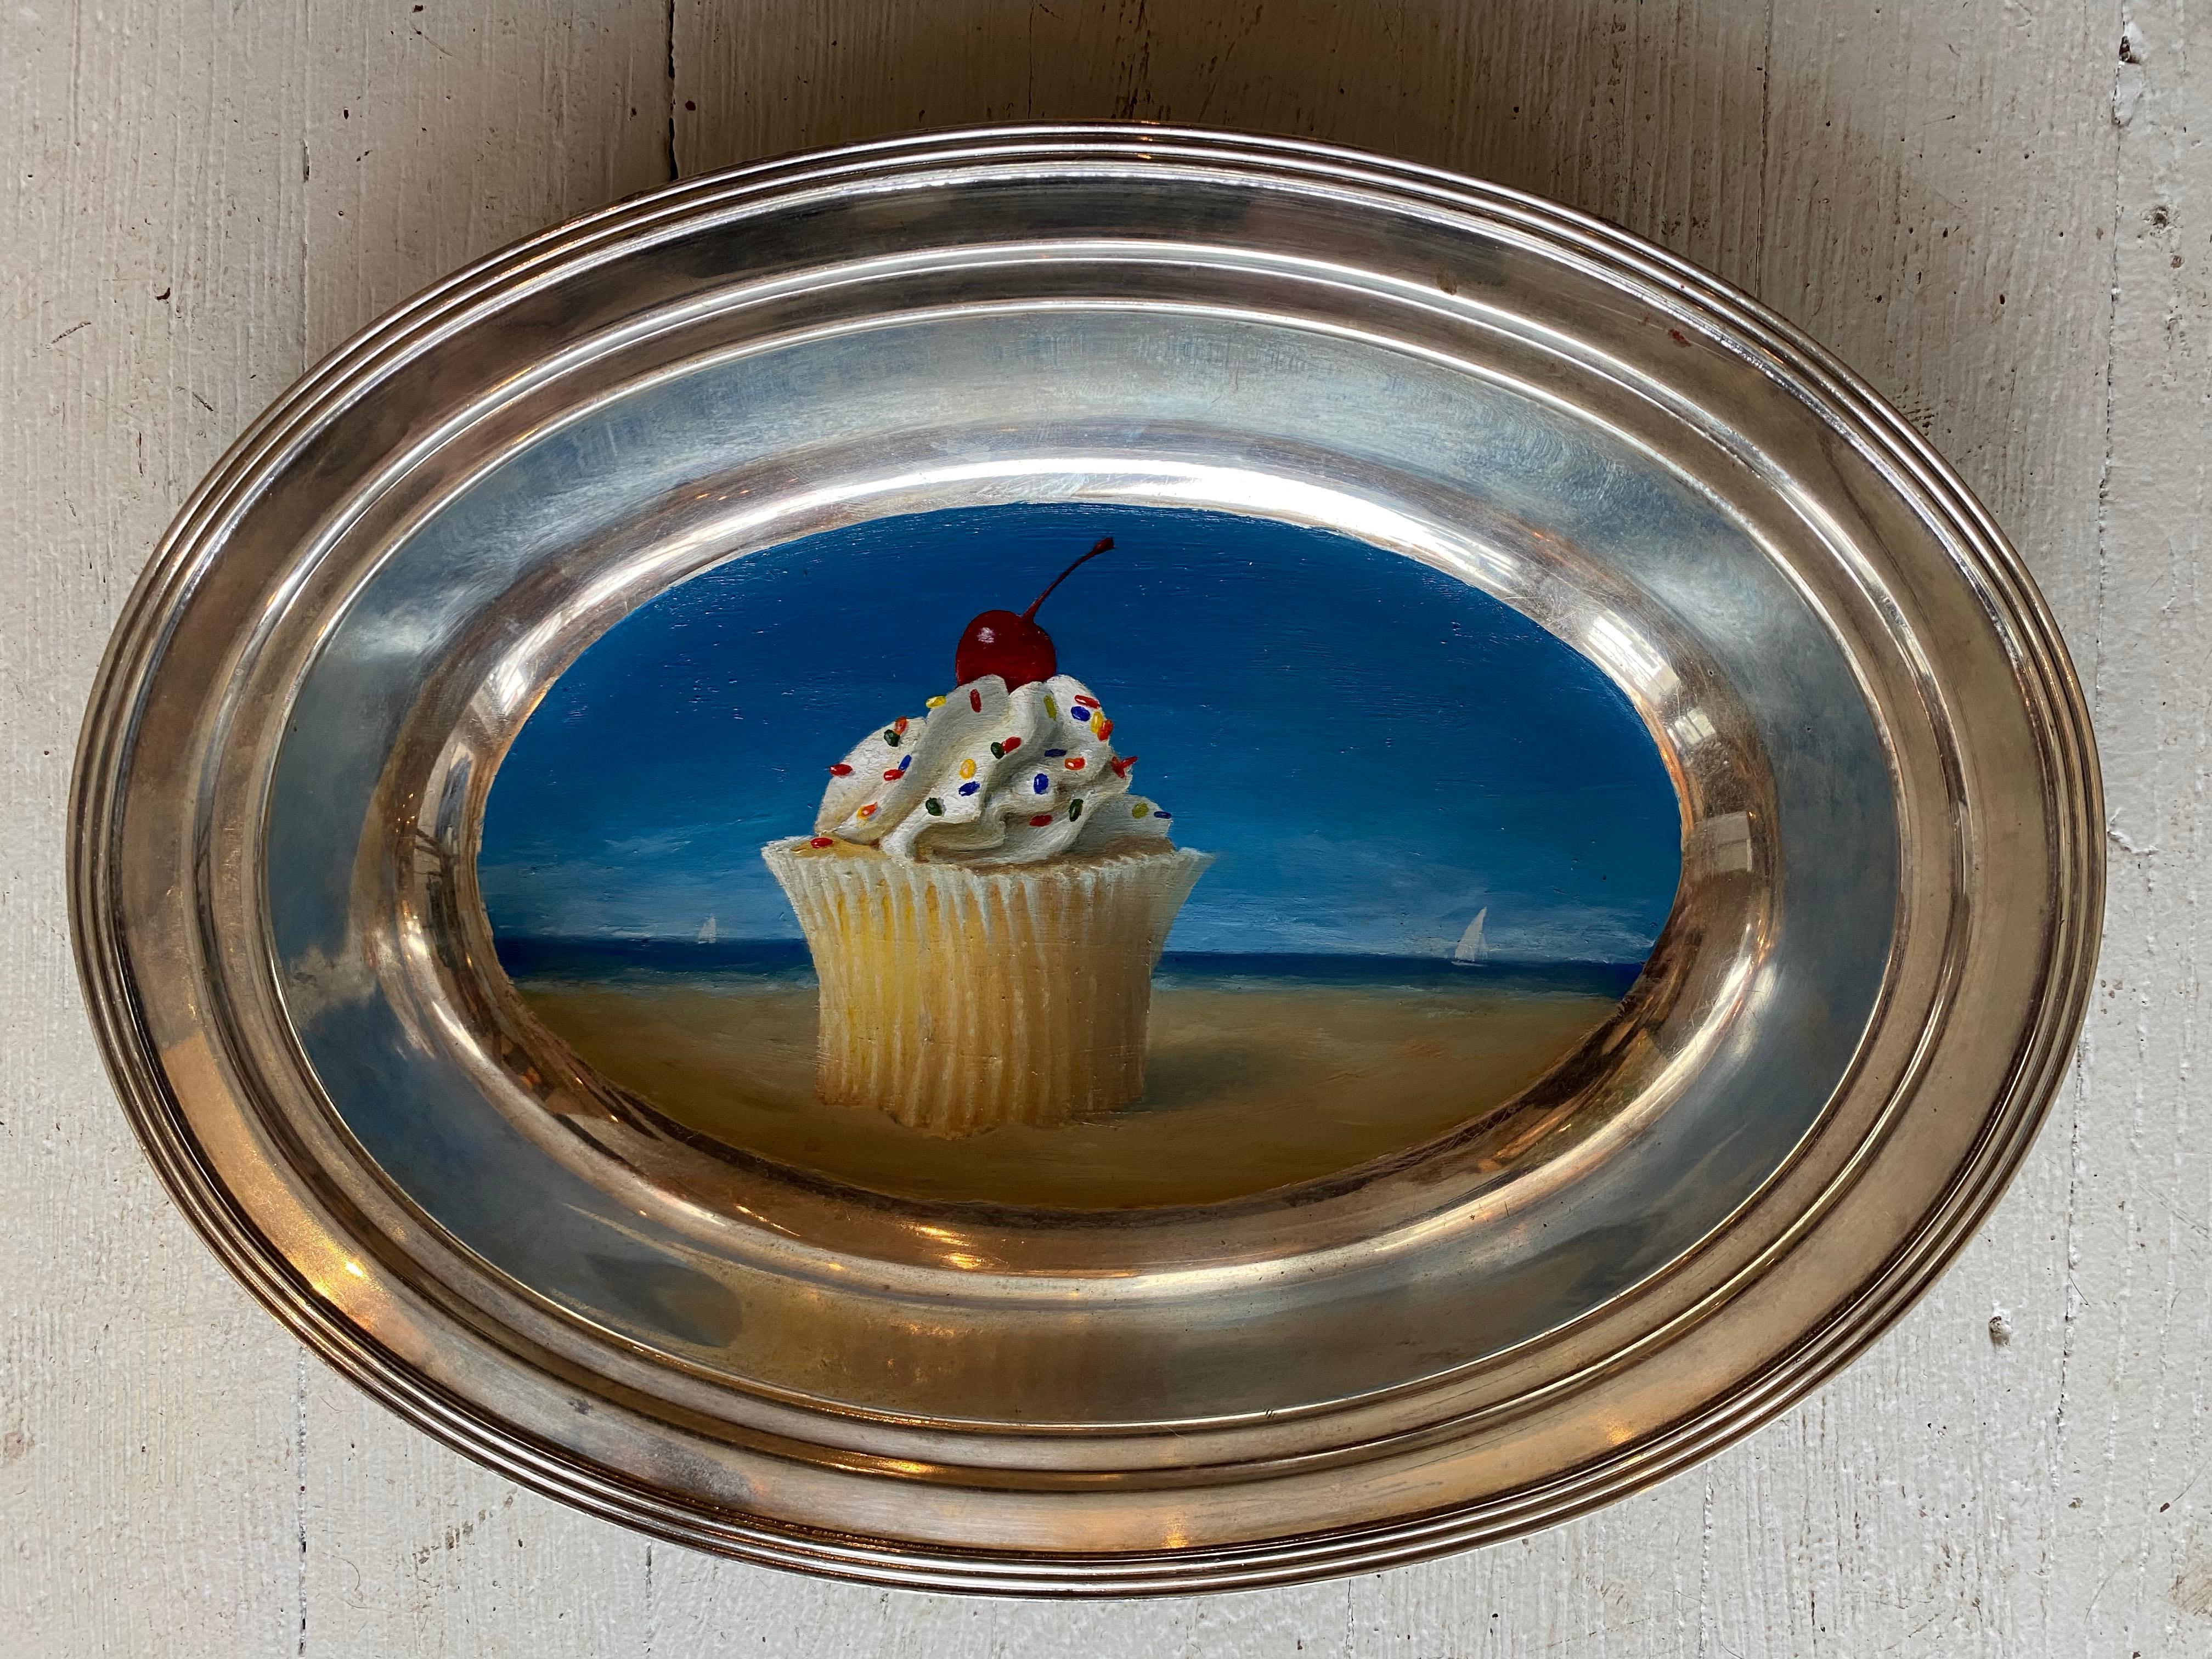 Cupcake By the Sea - unique oil painting on silver tray - Pop Art Painting by Anthony Ackrill